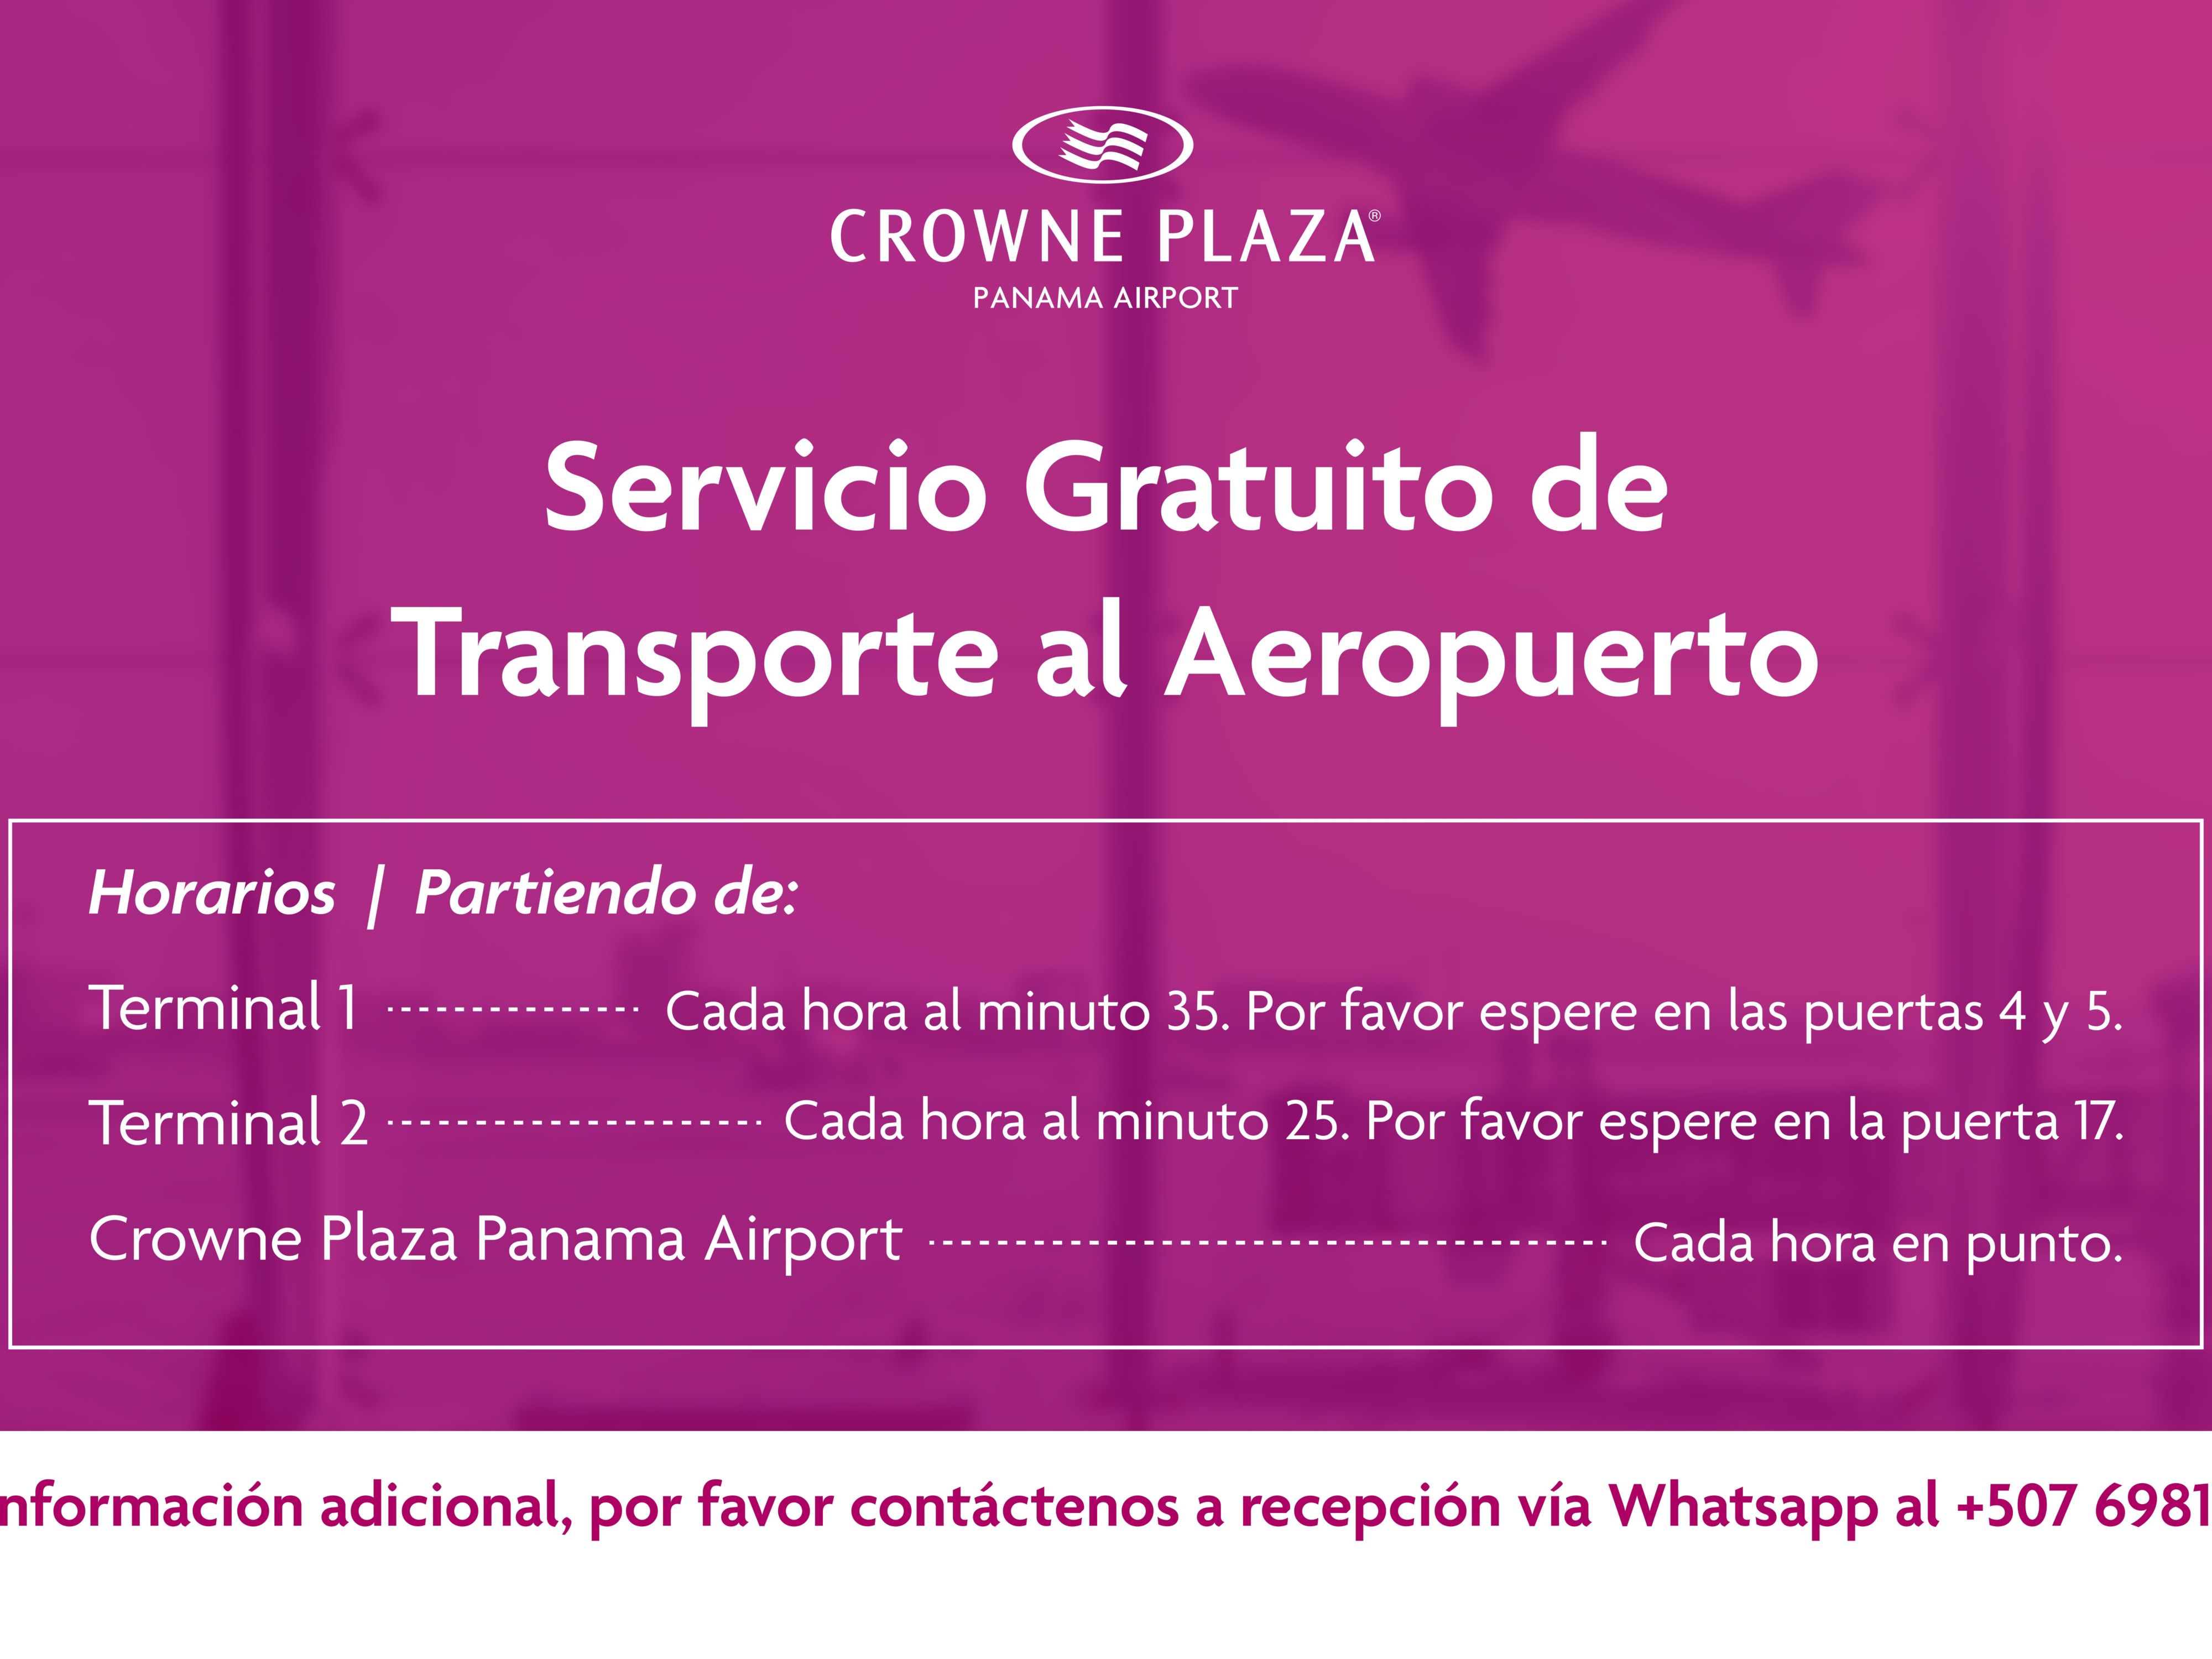 You don't need to make a reservation.   Just wait for the shuttle at these times. 
Departing from the hotel: every hour on time
Departing from Terminal 1: every hour at minute 35 at gates 4 and 5
Departing from Terminal 2: every hour at minute 25 at gate 17
For more information, you may contact us via WhatsApp at 507 6981 9956